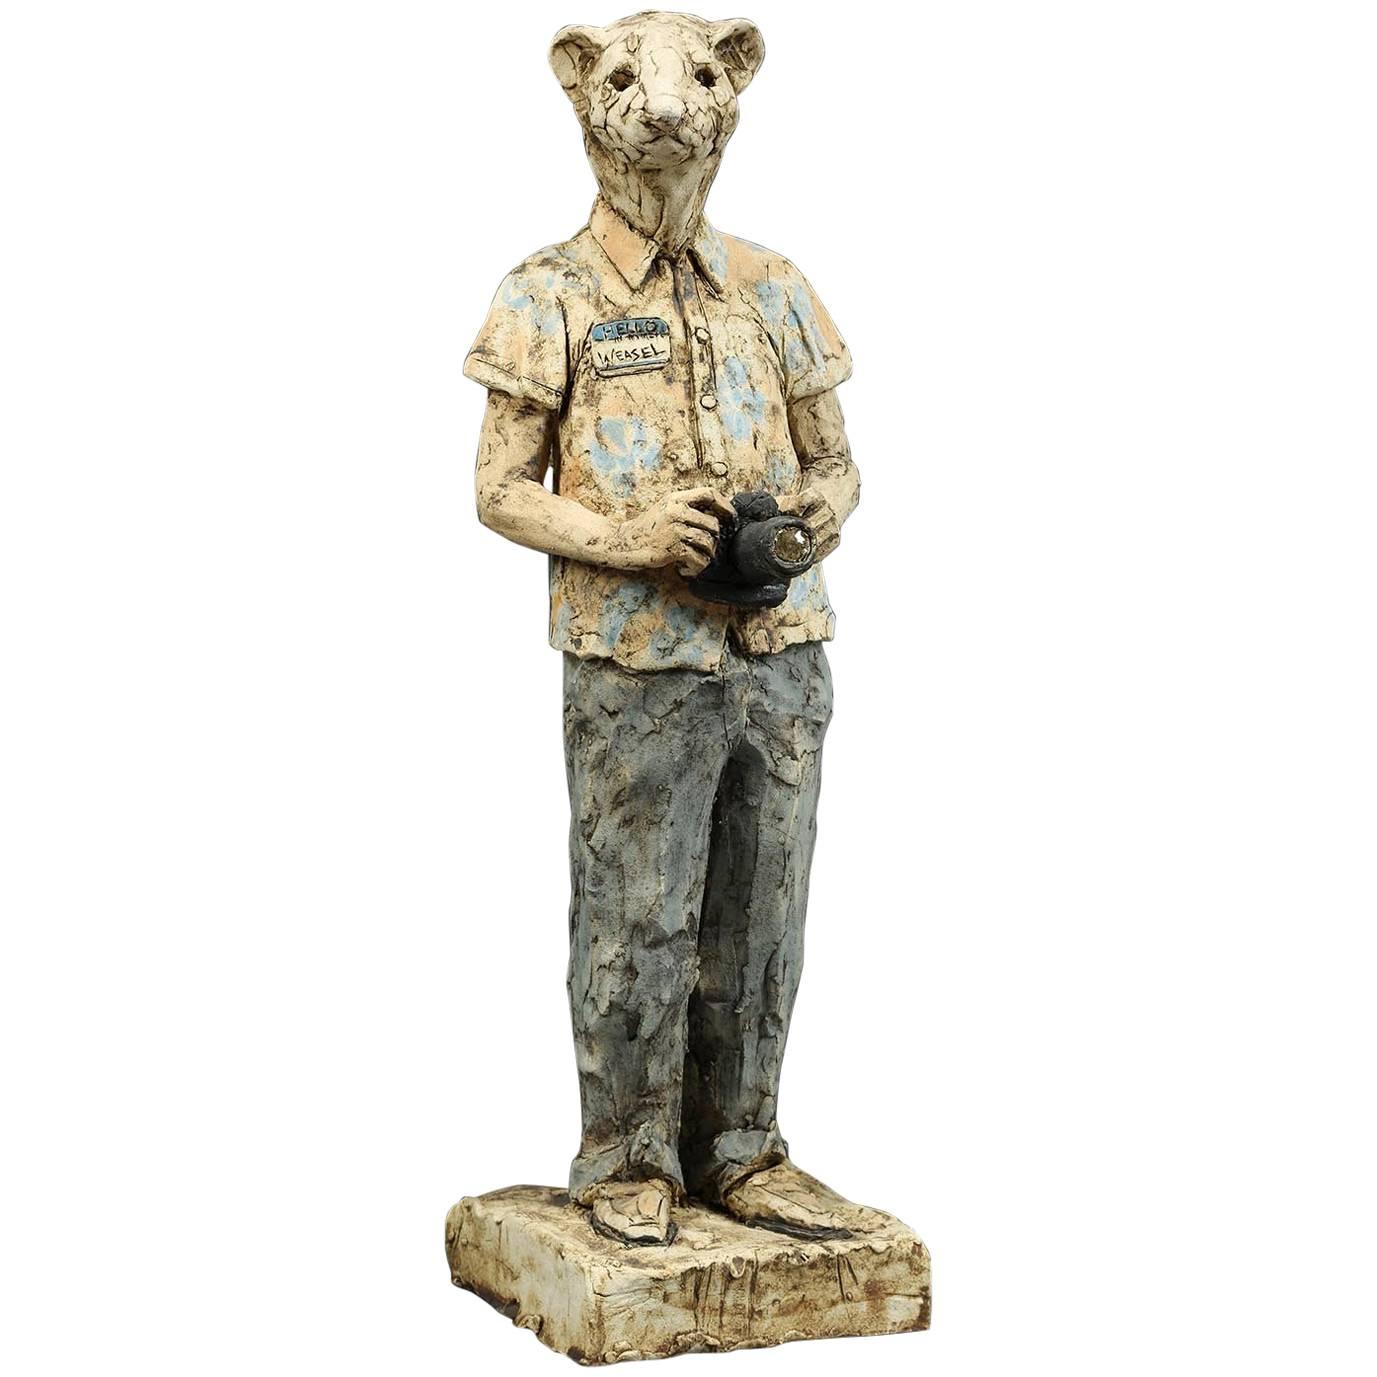 Contemporary Solid Ceramic Standing Figure "Tourist" by Zachary Roberts